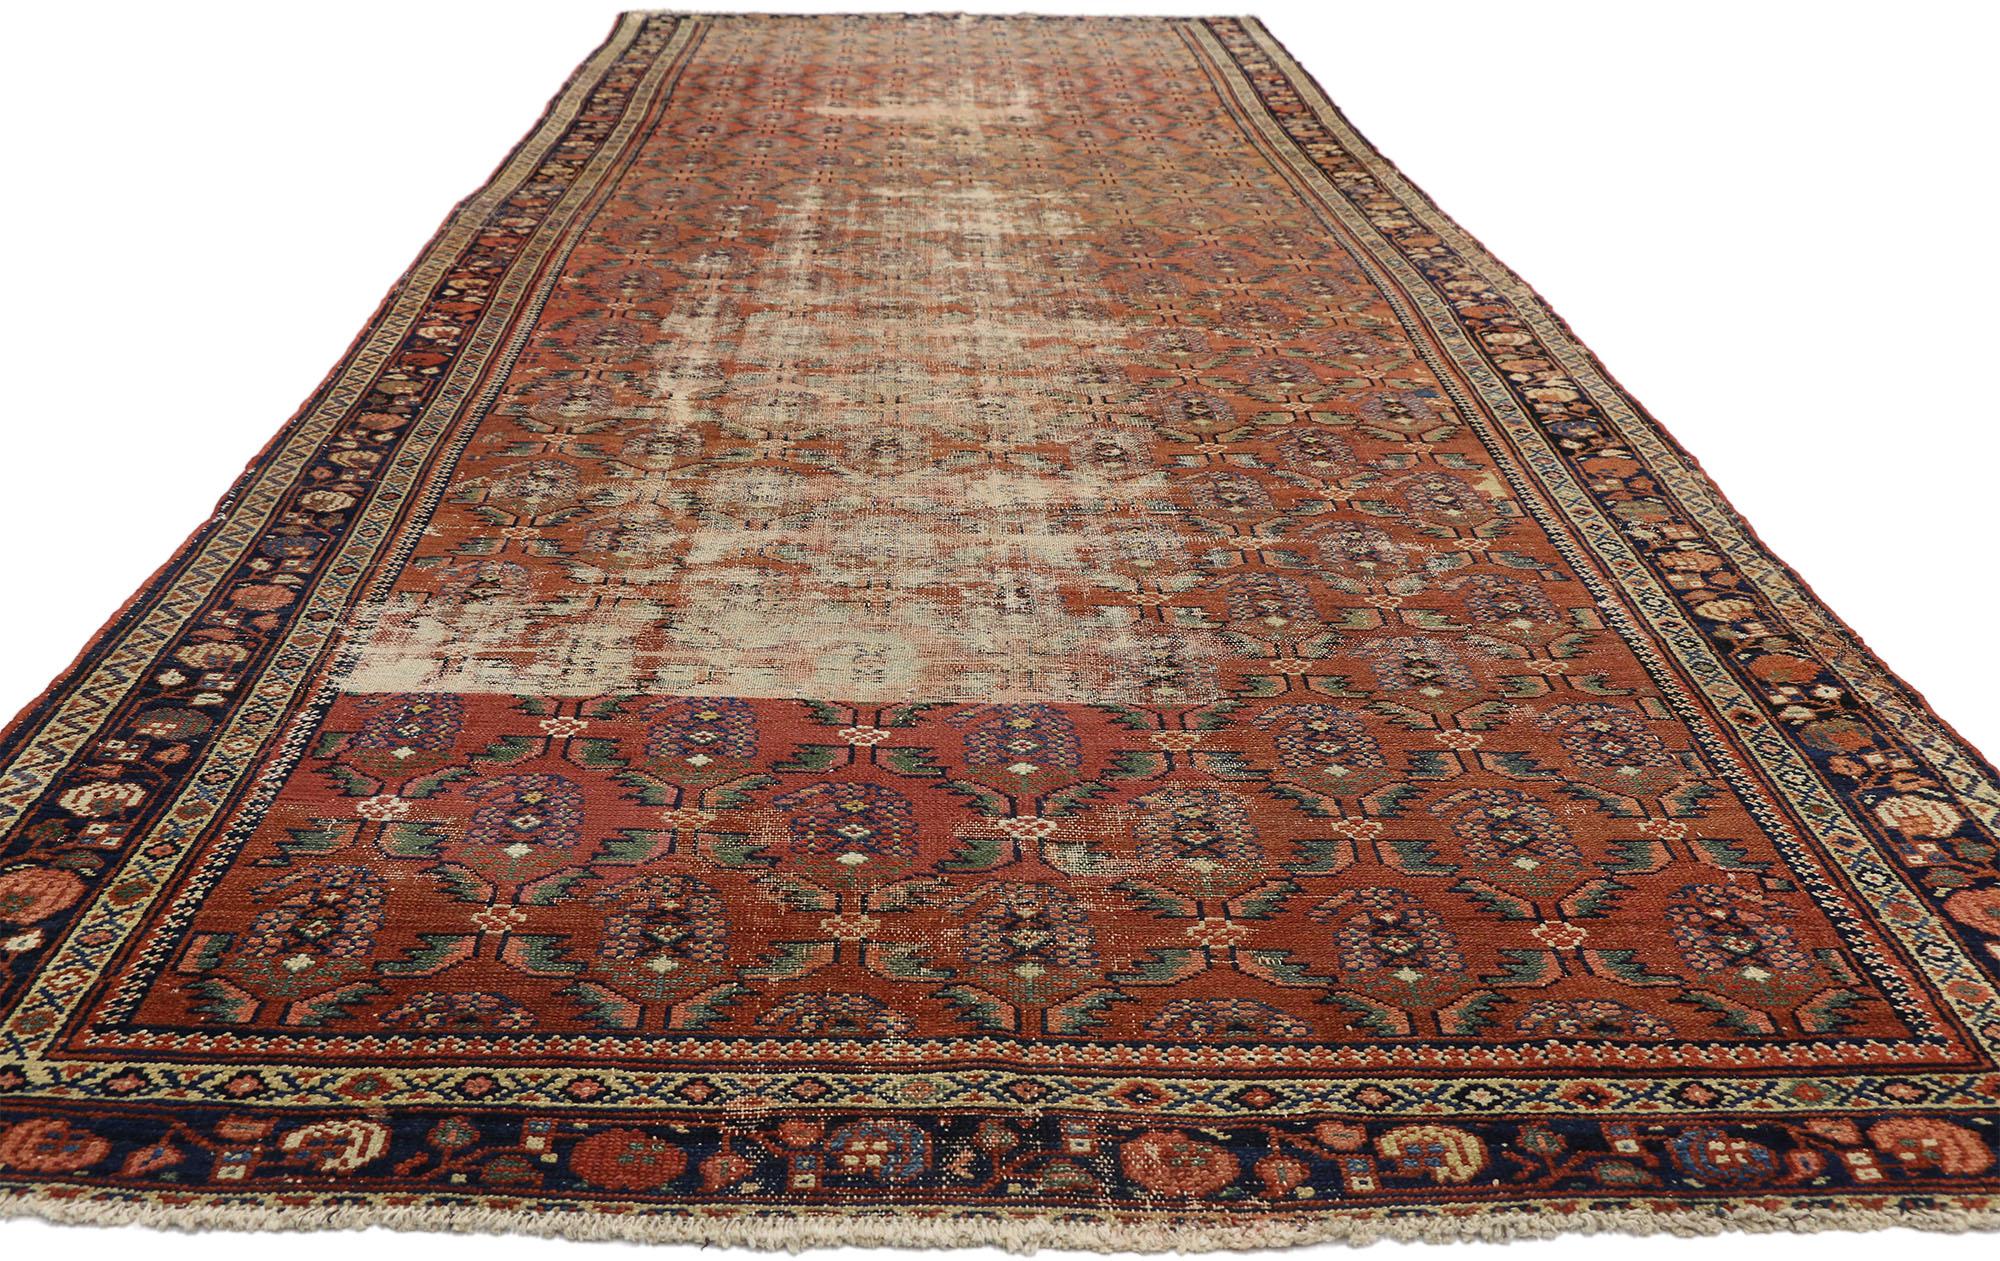 Malayer Distressed Antique Persian Hamadan Gallery Rug with Rustic Industrial Style For Sale